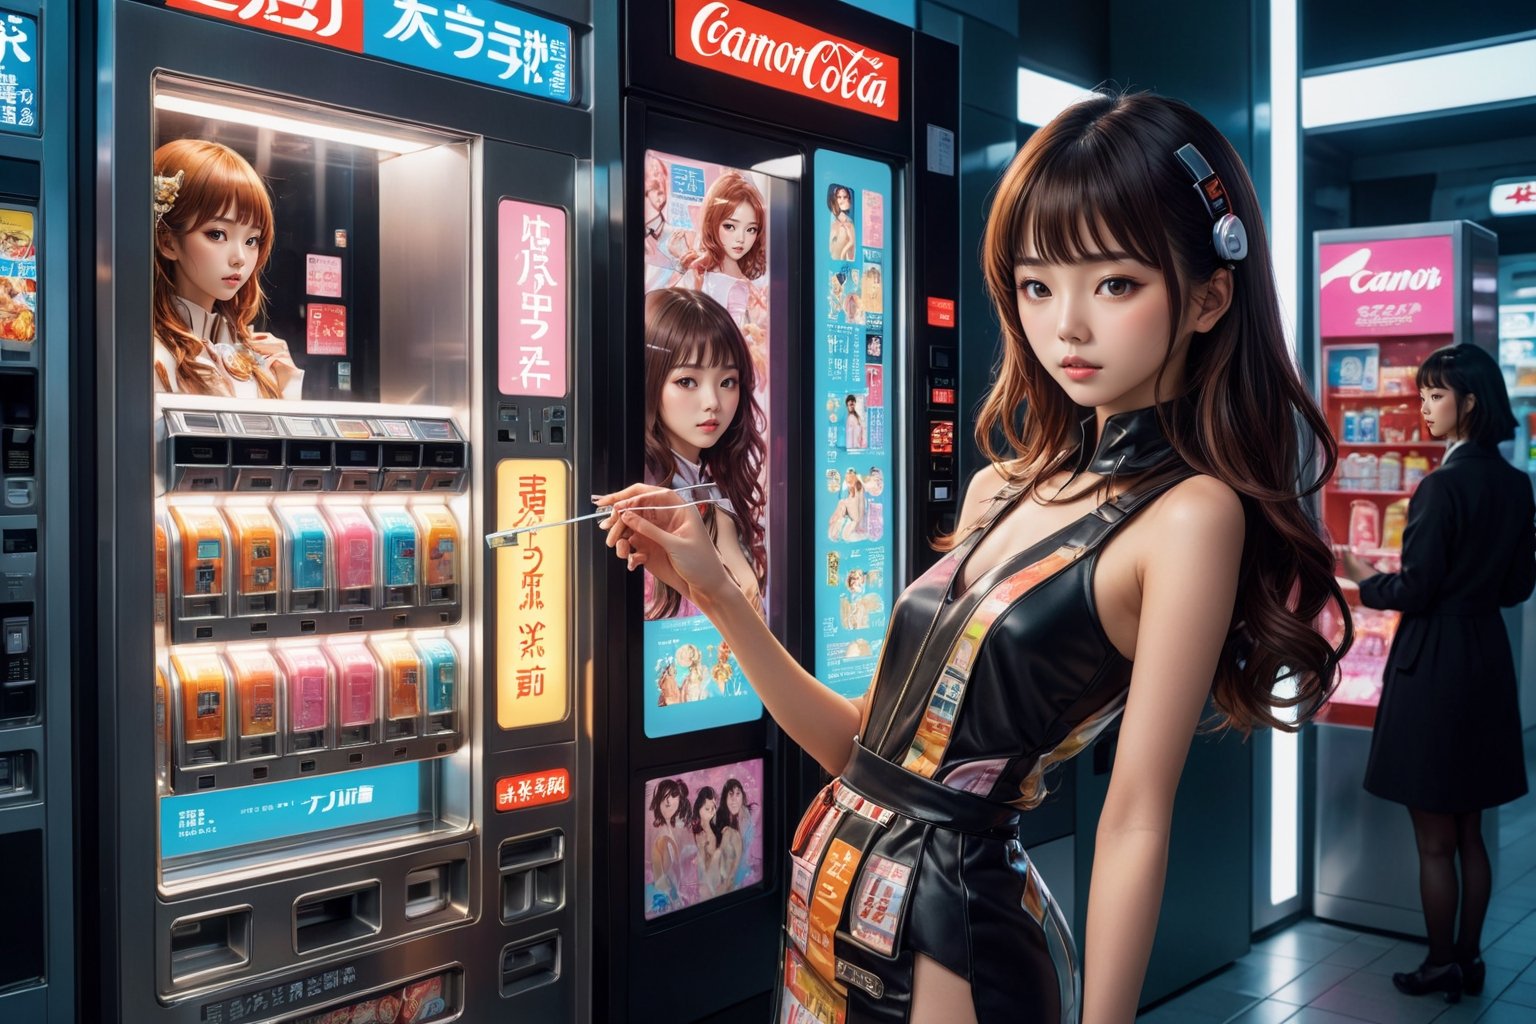 Photo of a young Japanese woman being sold from a futuristic, high-tech vending machine. The vending machine is filled with various female figures, each representing a different type of companion. Style by J.C. Leyendecker, Canon 5d Mark 4, Kodak Ektar, neon light